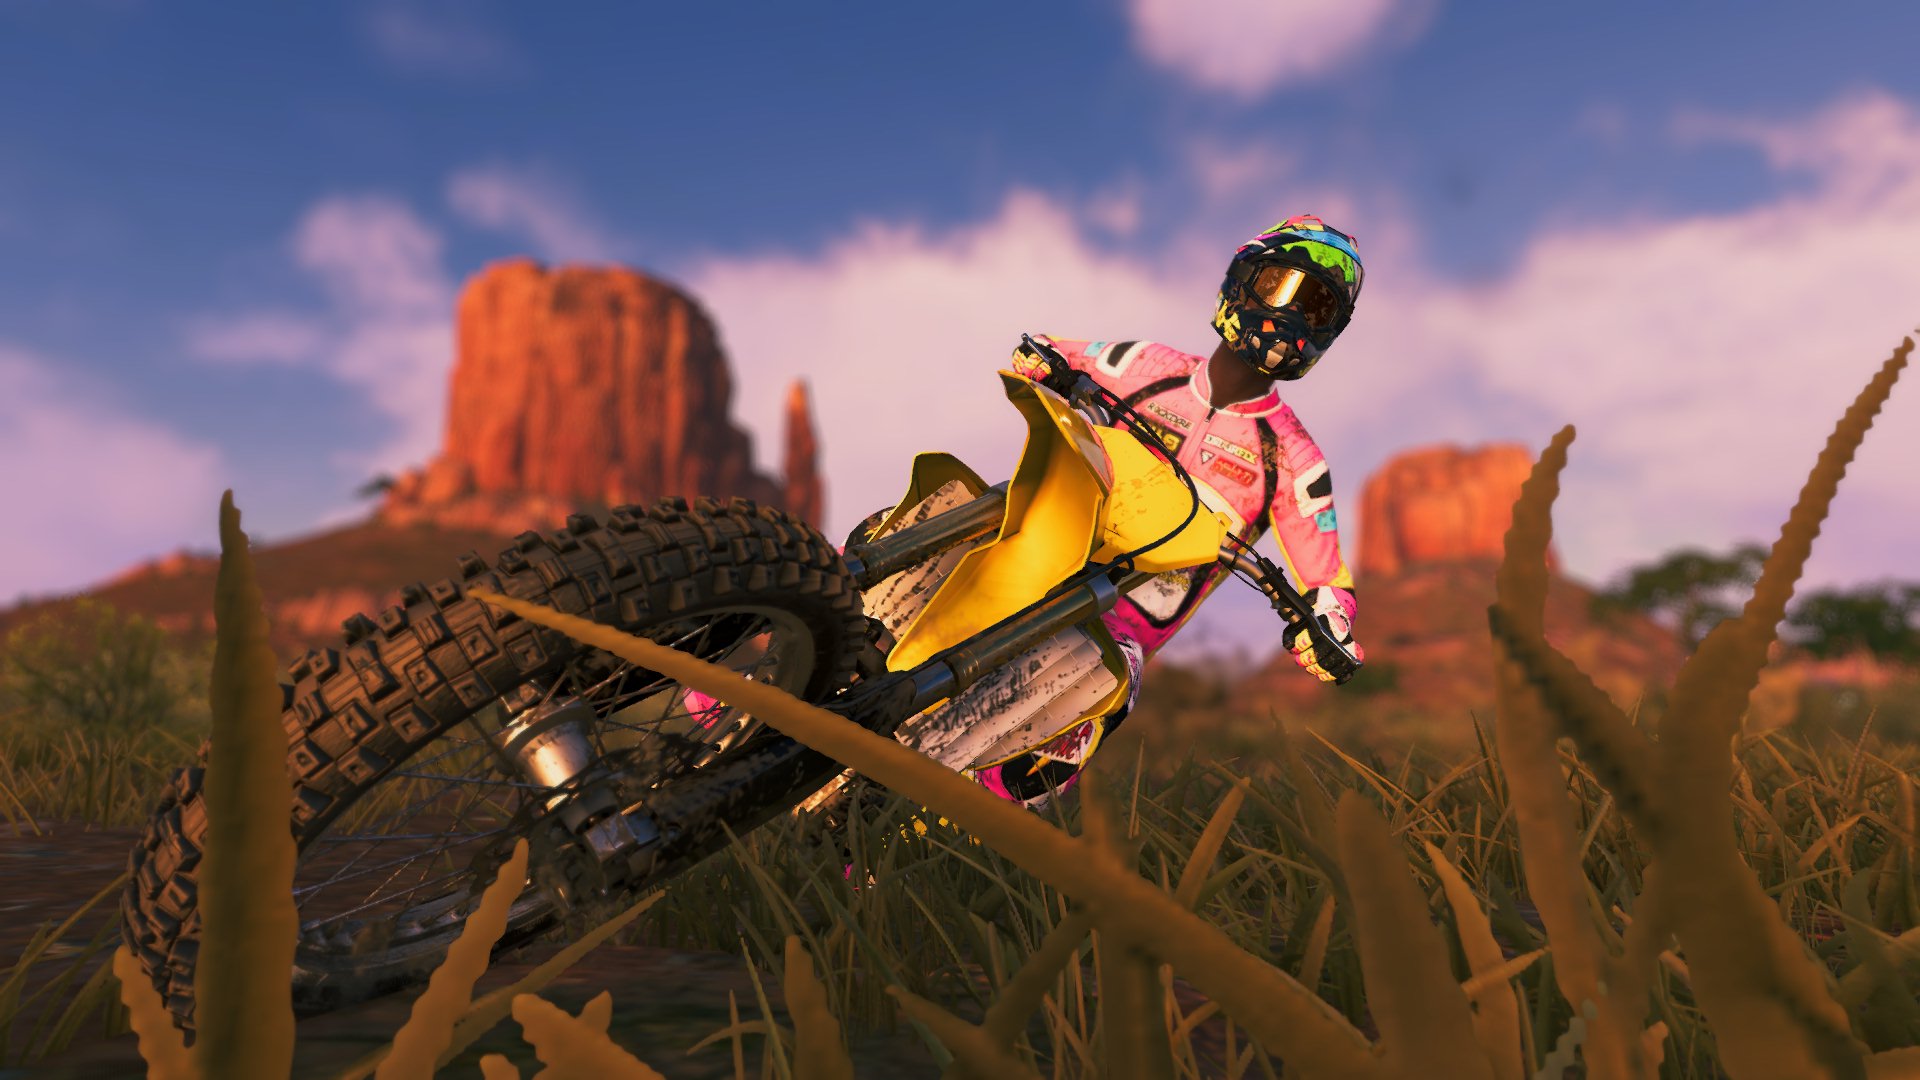 dirtbike by countachLover123